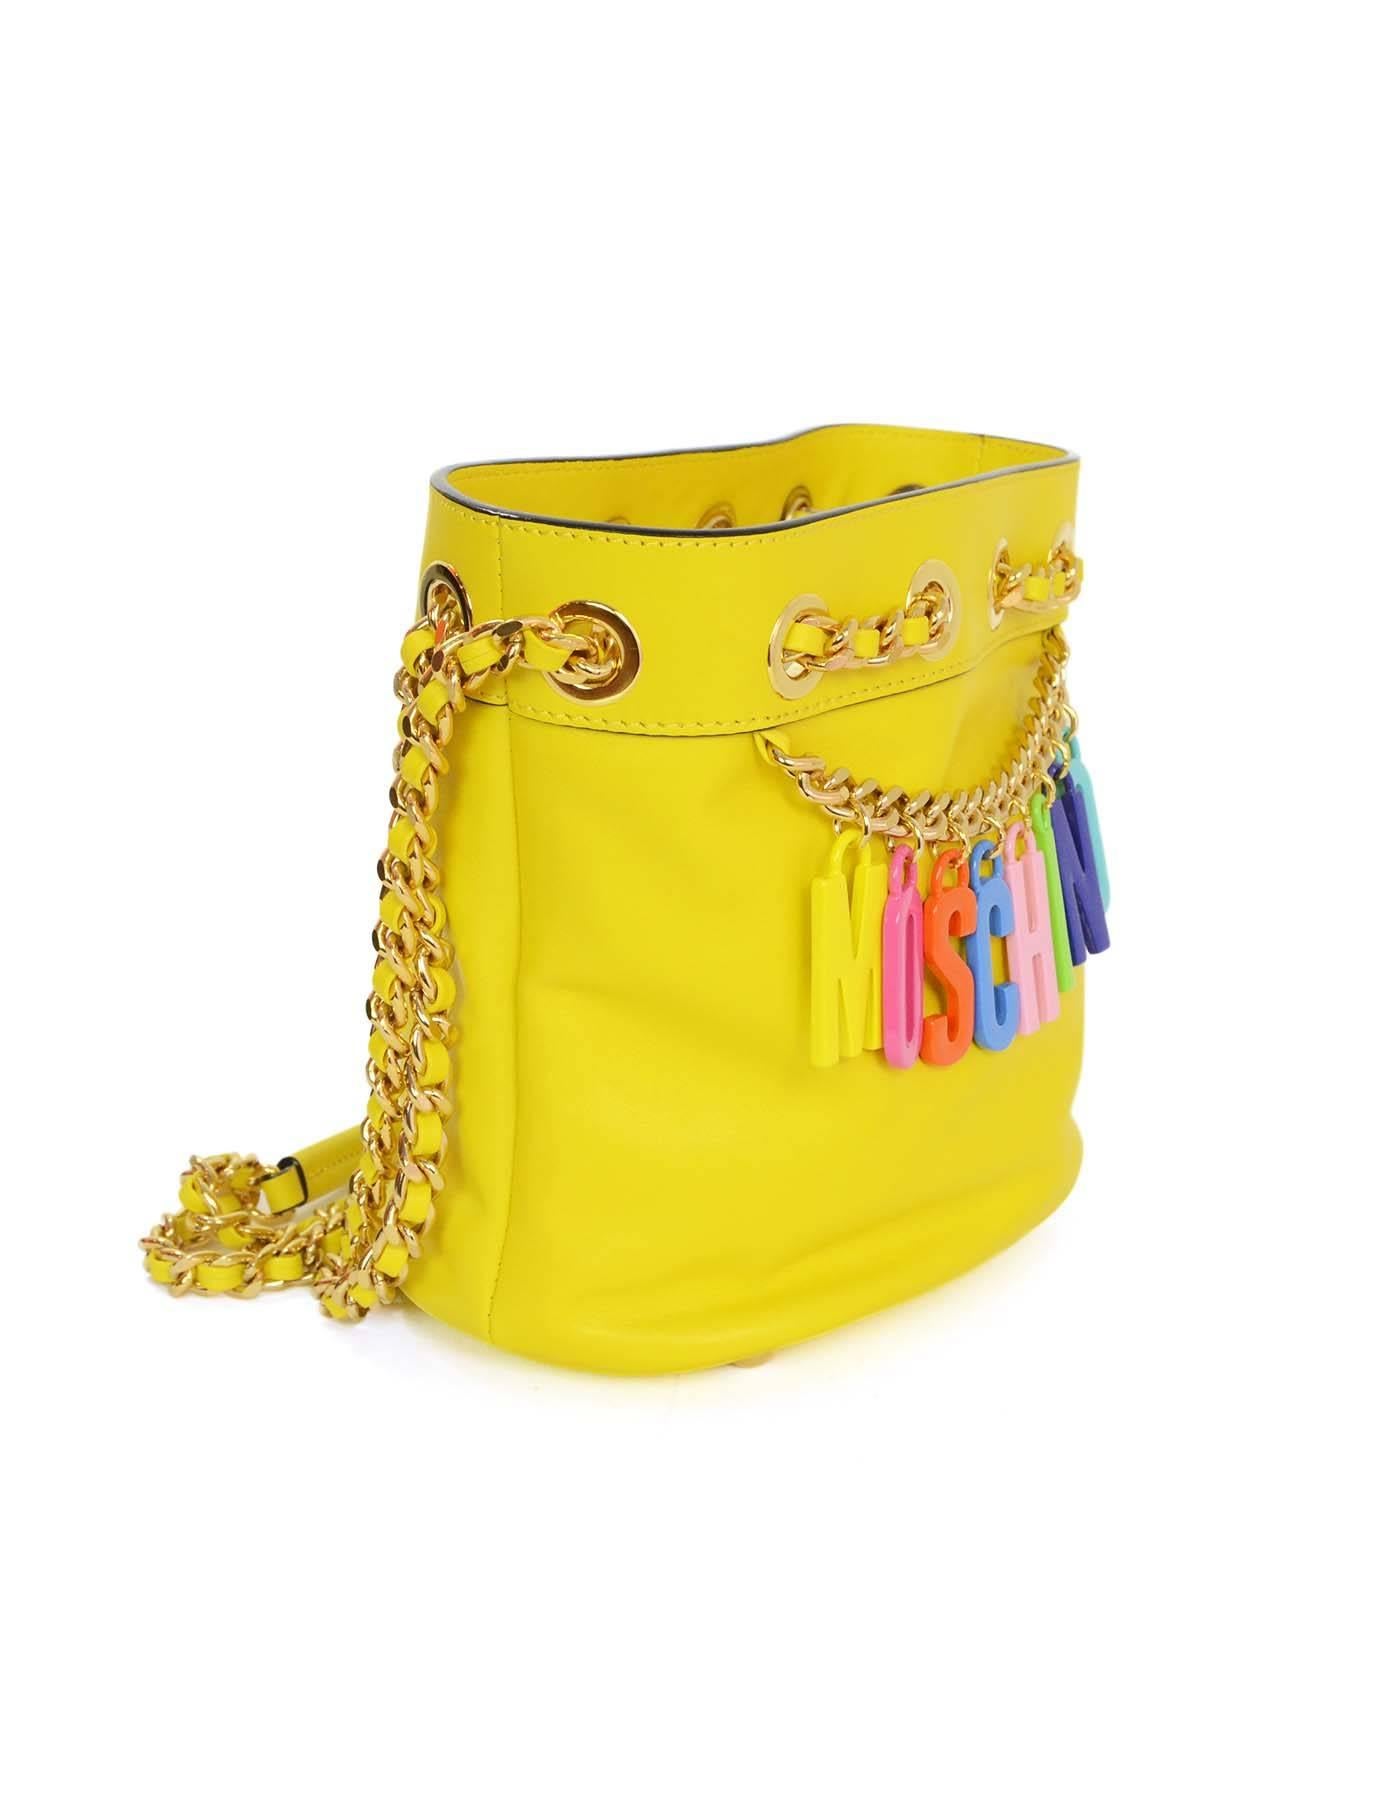 Moschino Yellow Charm Bucket Bag
Features multi-colored Moschino letter charms with gold chain detailing

Made In: Italy
Color: Yellow
Hardware: Goldtone
Materials: Leather and metal
Lining: Yellow textile
Closure/opening: Open top with draw